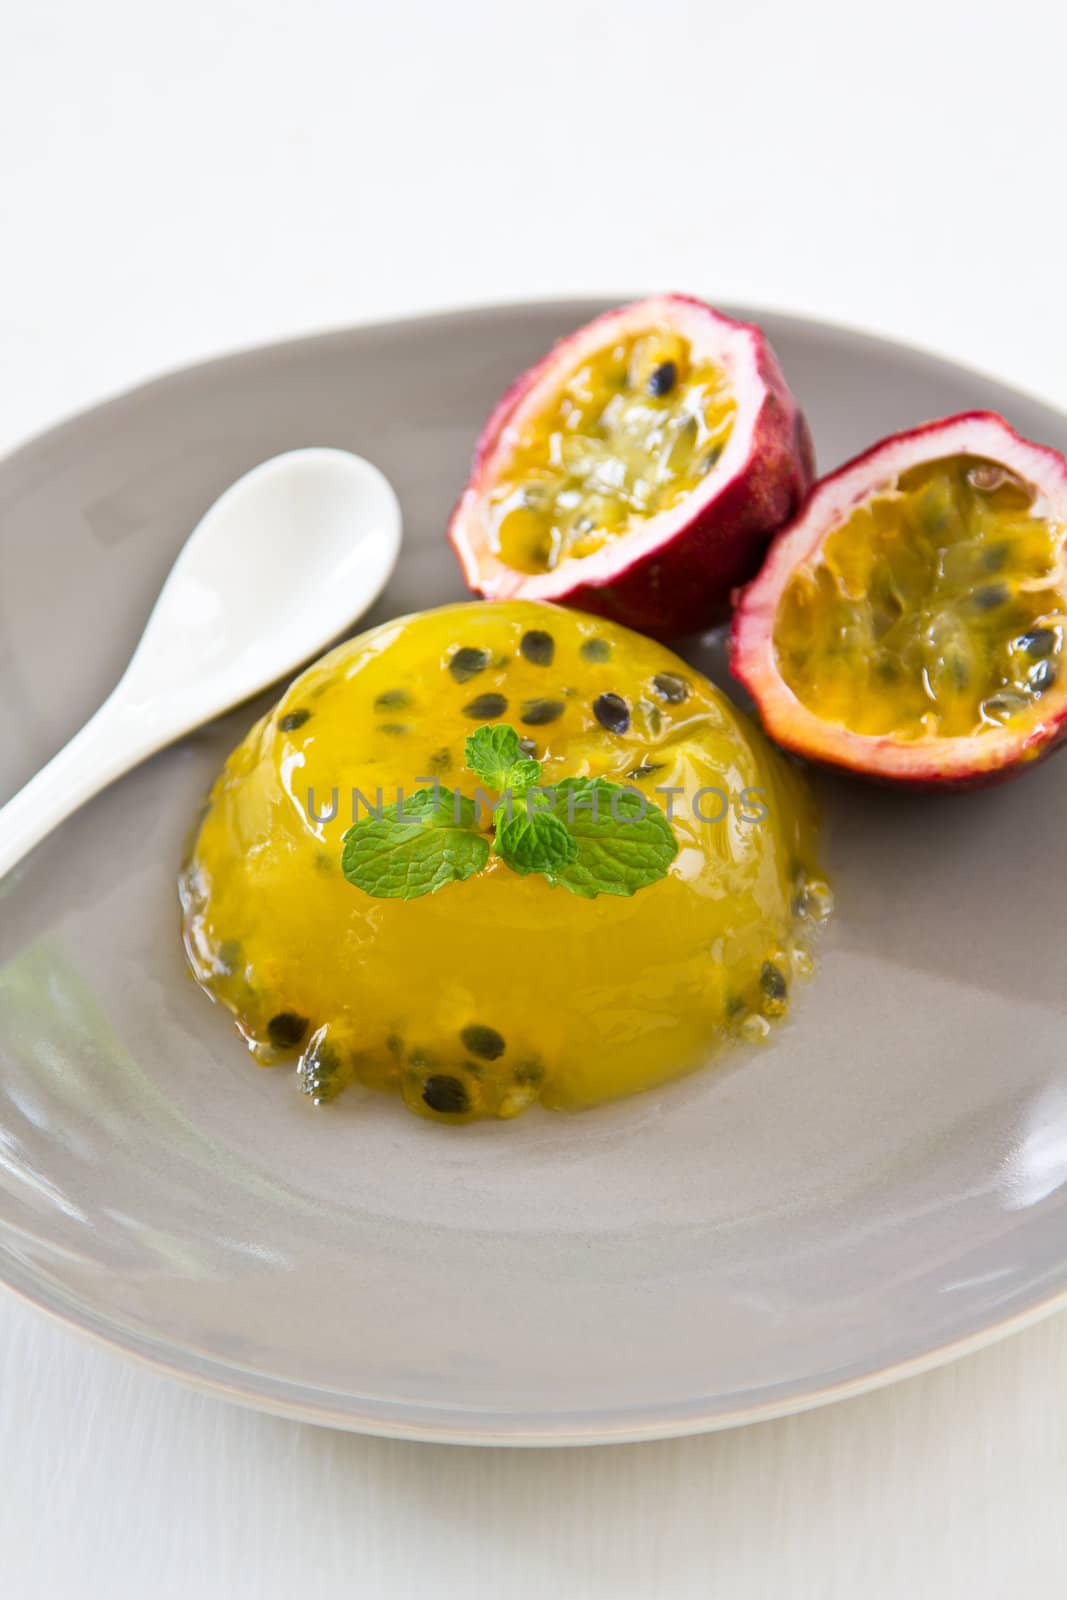 Passion fruit jelly by vanillaechoes